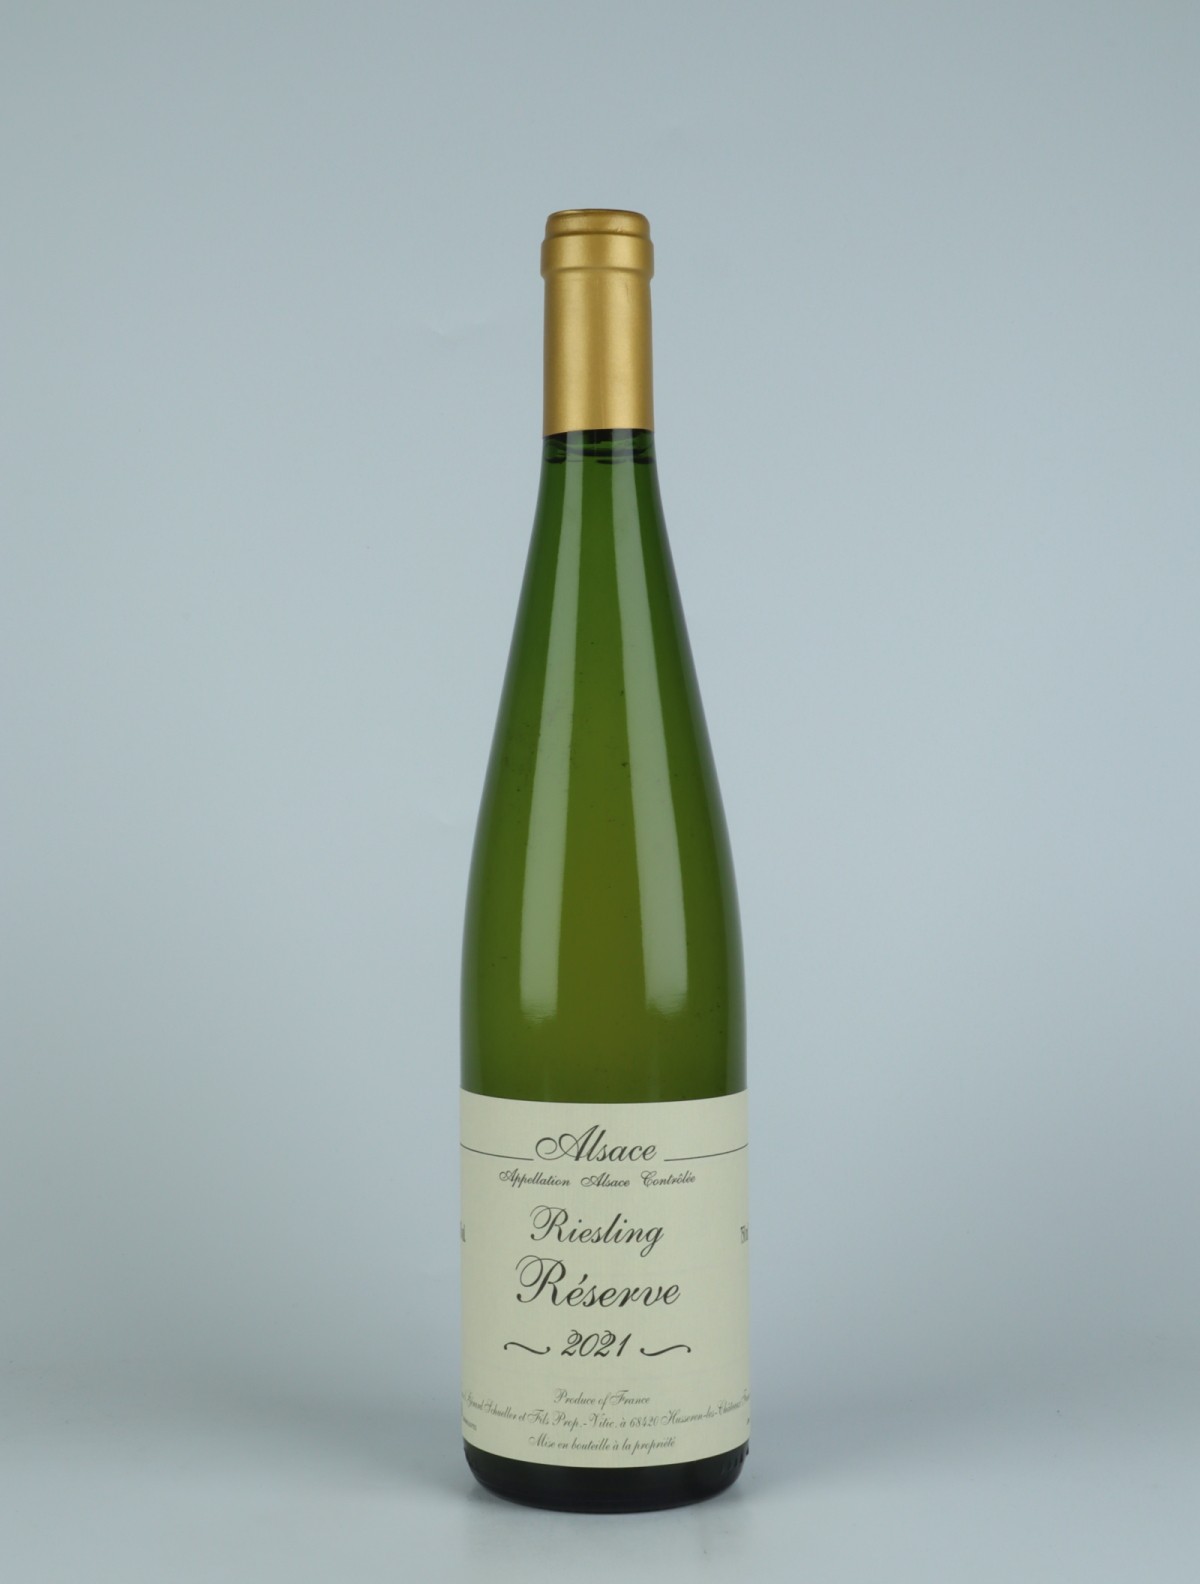 A bottle 2021 Riesling - Réserve White wine from Gérard Schueller, Alsace in France